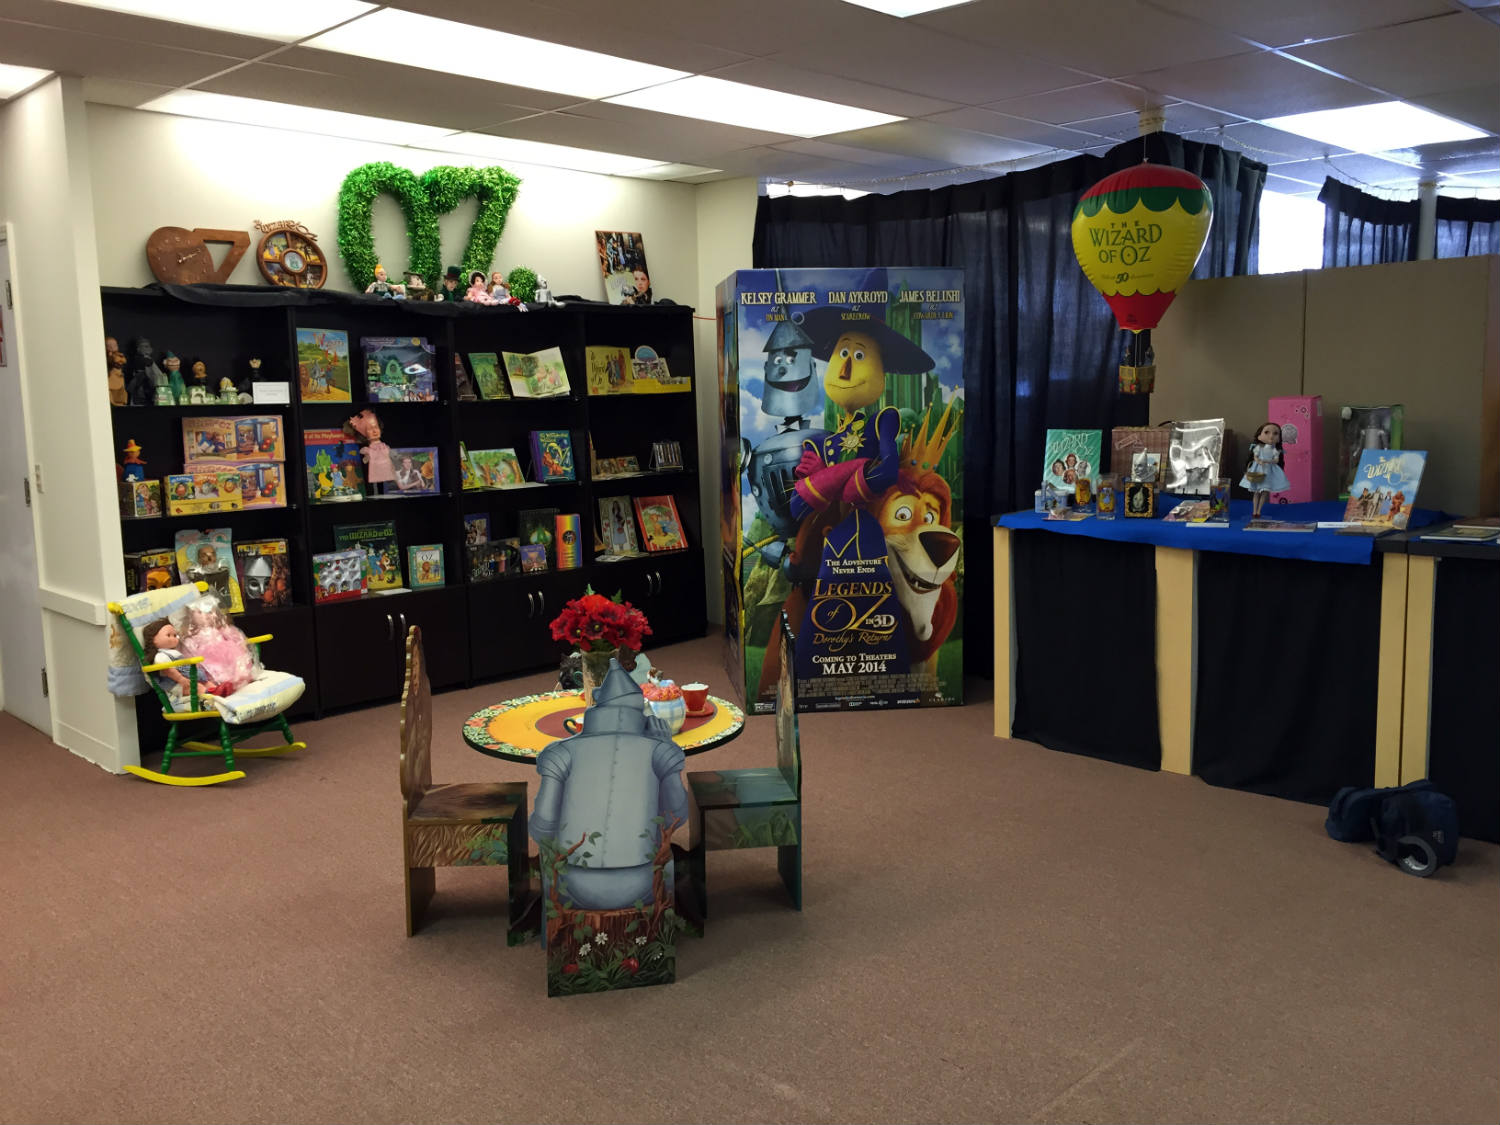 Inside the All Things Oz Museum in Chittenango, New York